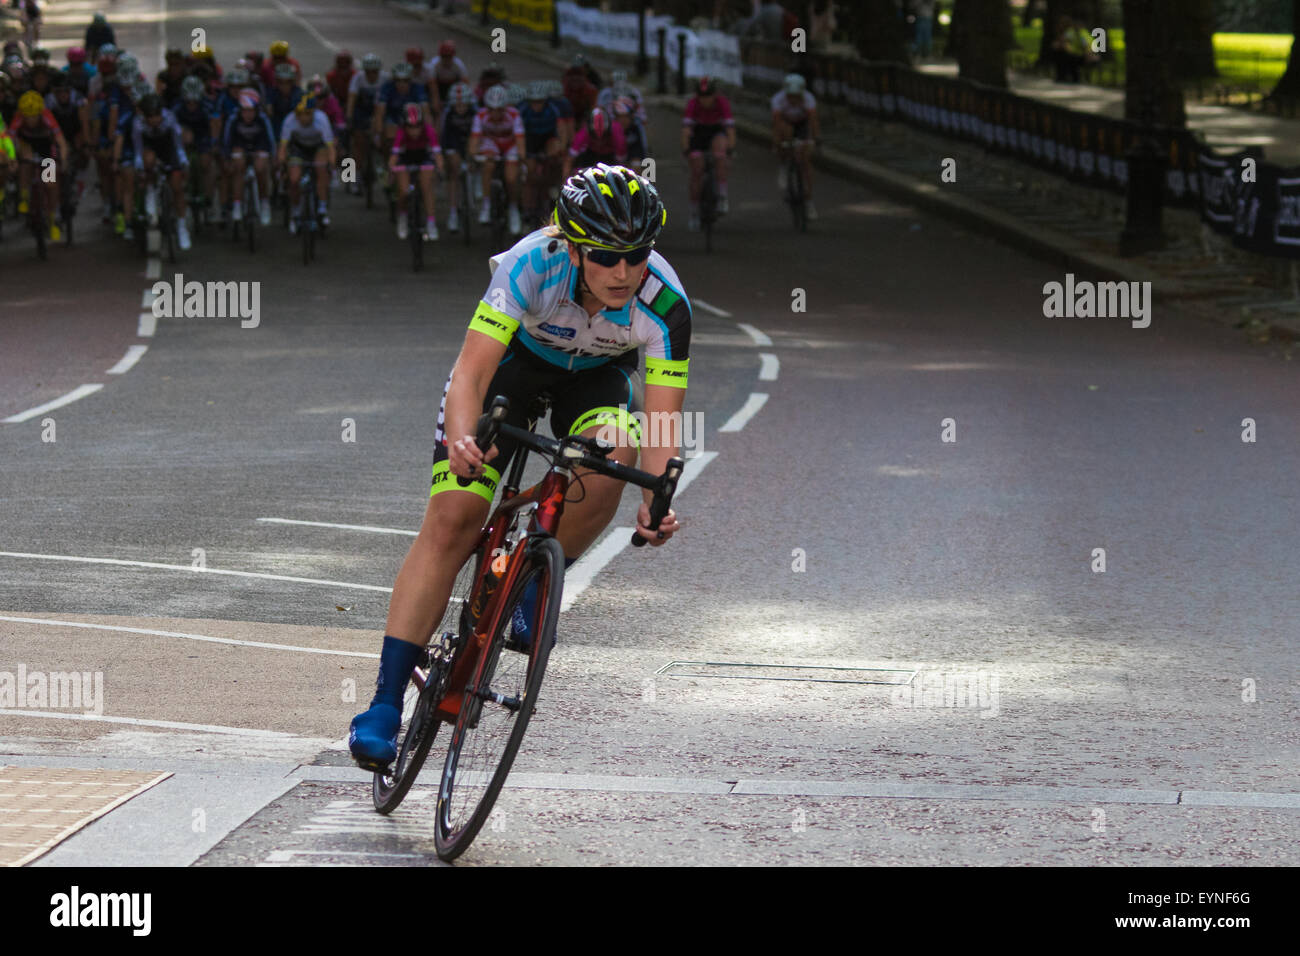 Westminster, London, August 1st 2015. Top women cyclists compete in the Prudential Ride London Grand Prix around St James's Park. Stock Photo